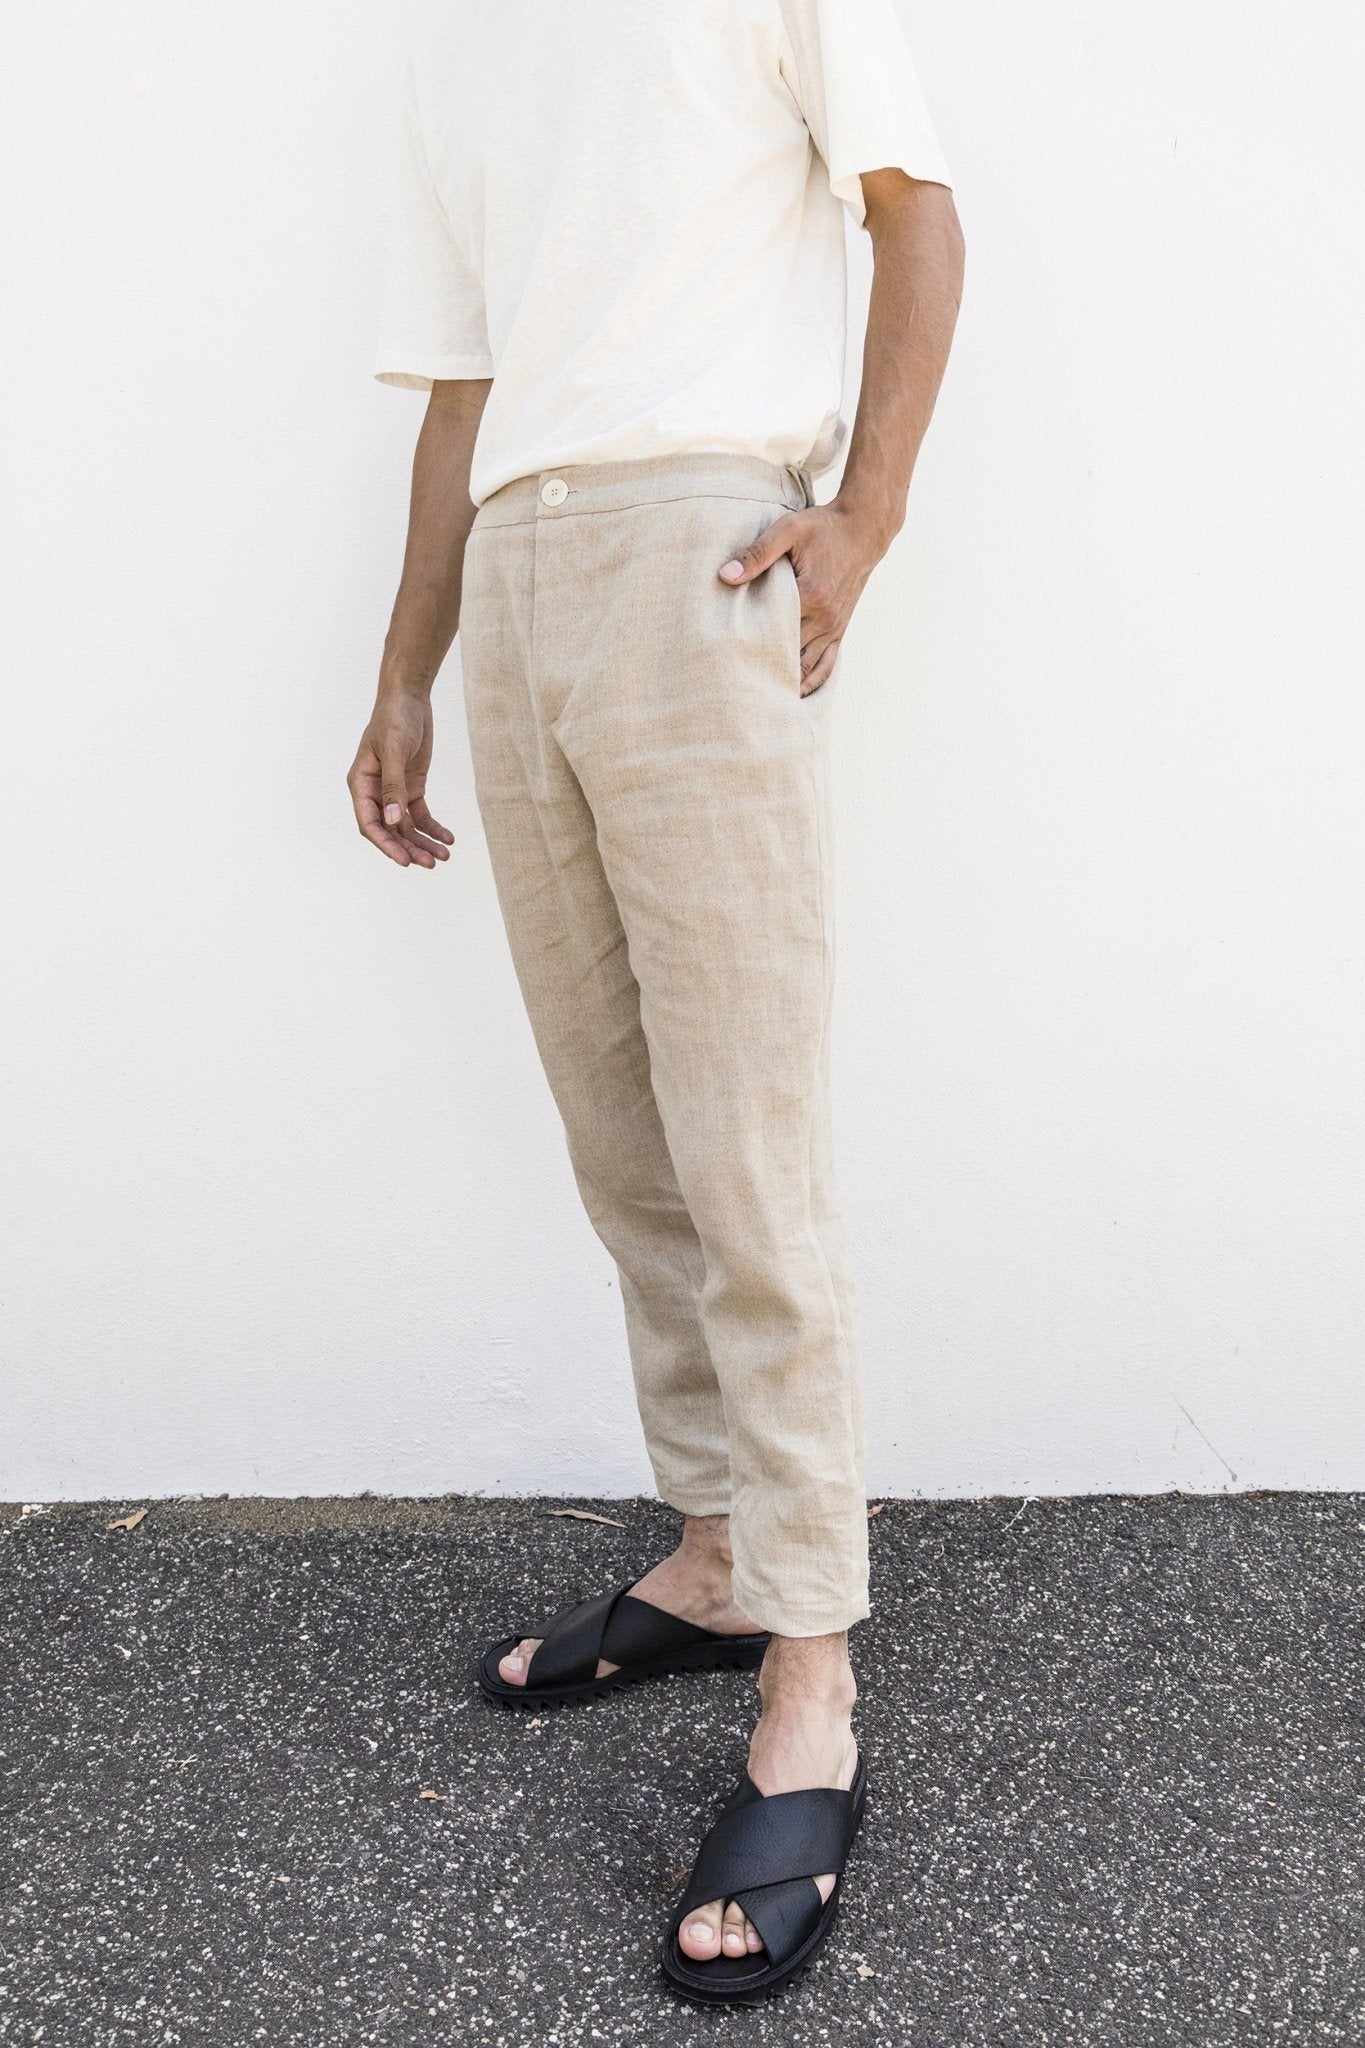 A.BCH A.18 Undyed Semi-Tailored Trousers in Organic Linen